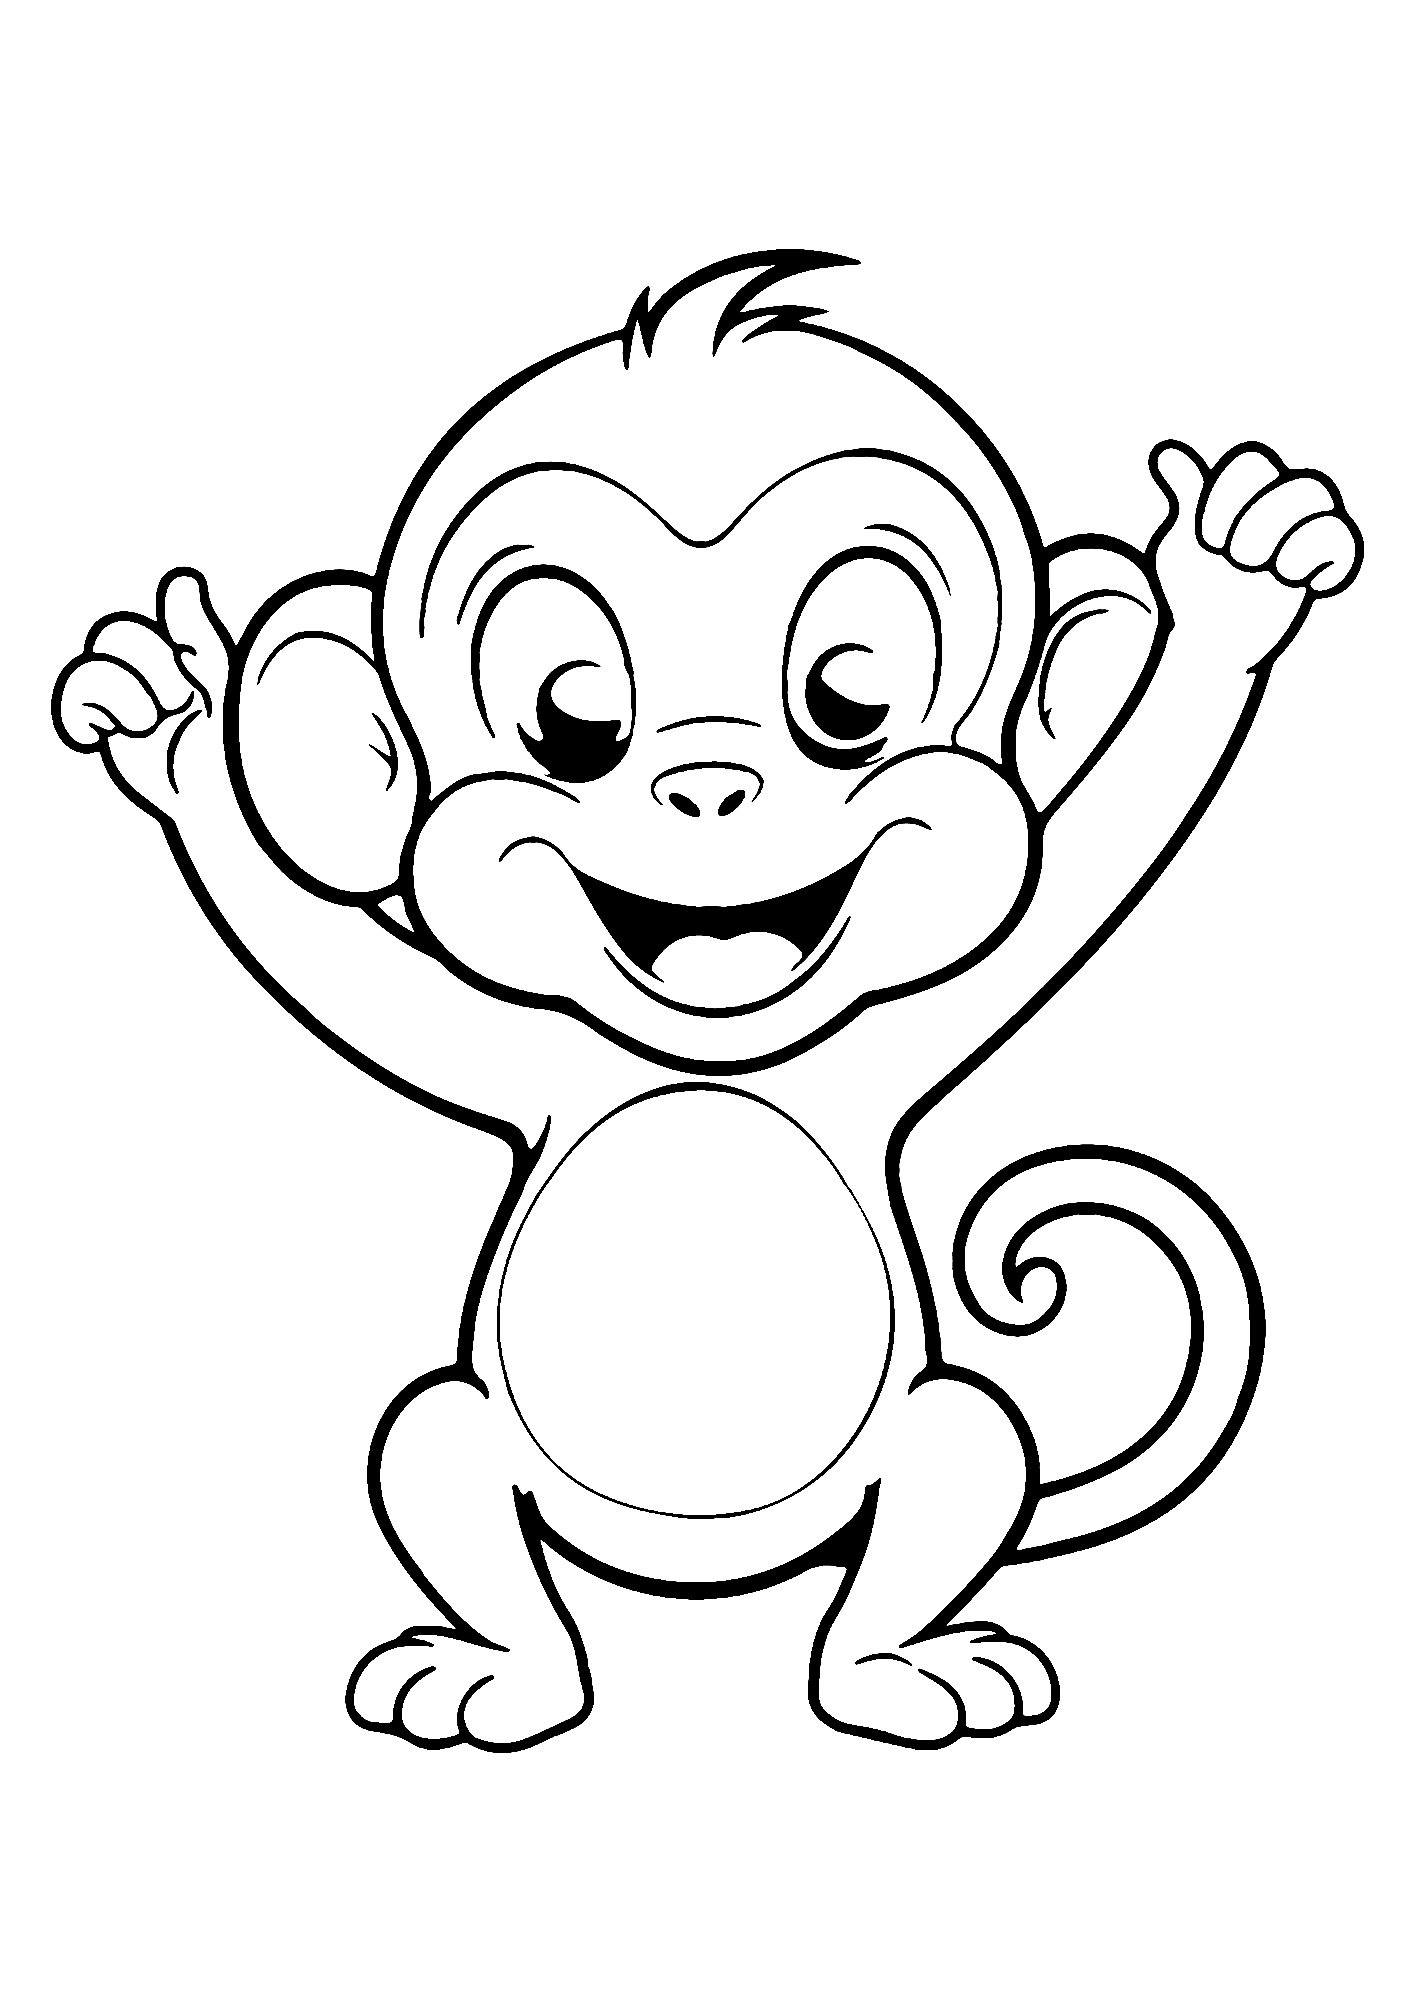 Monkey Cartoon Free Coloring Page